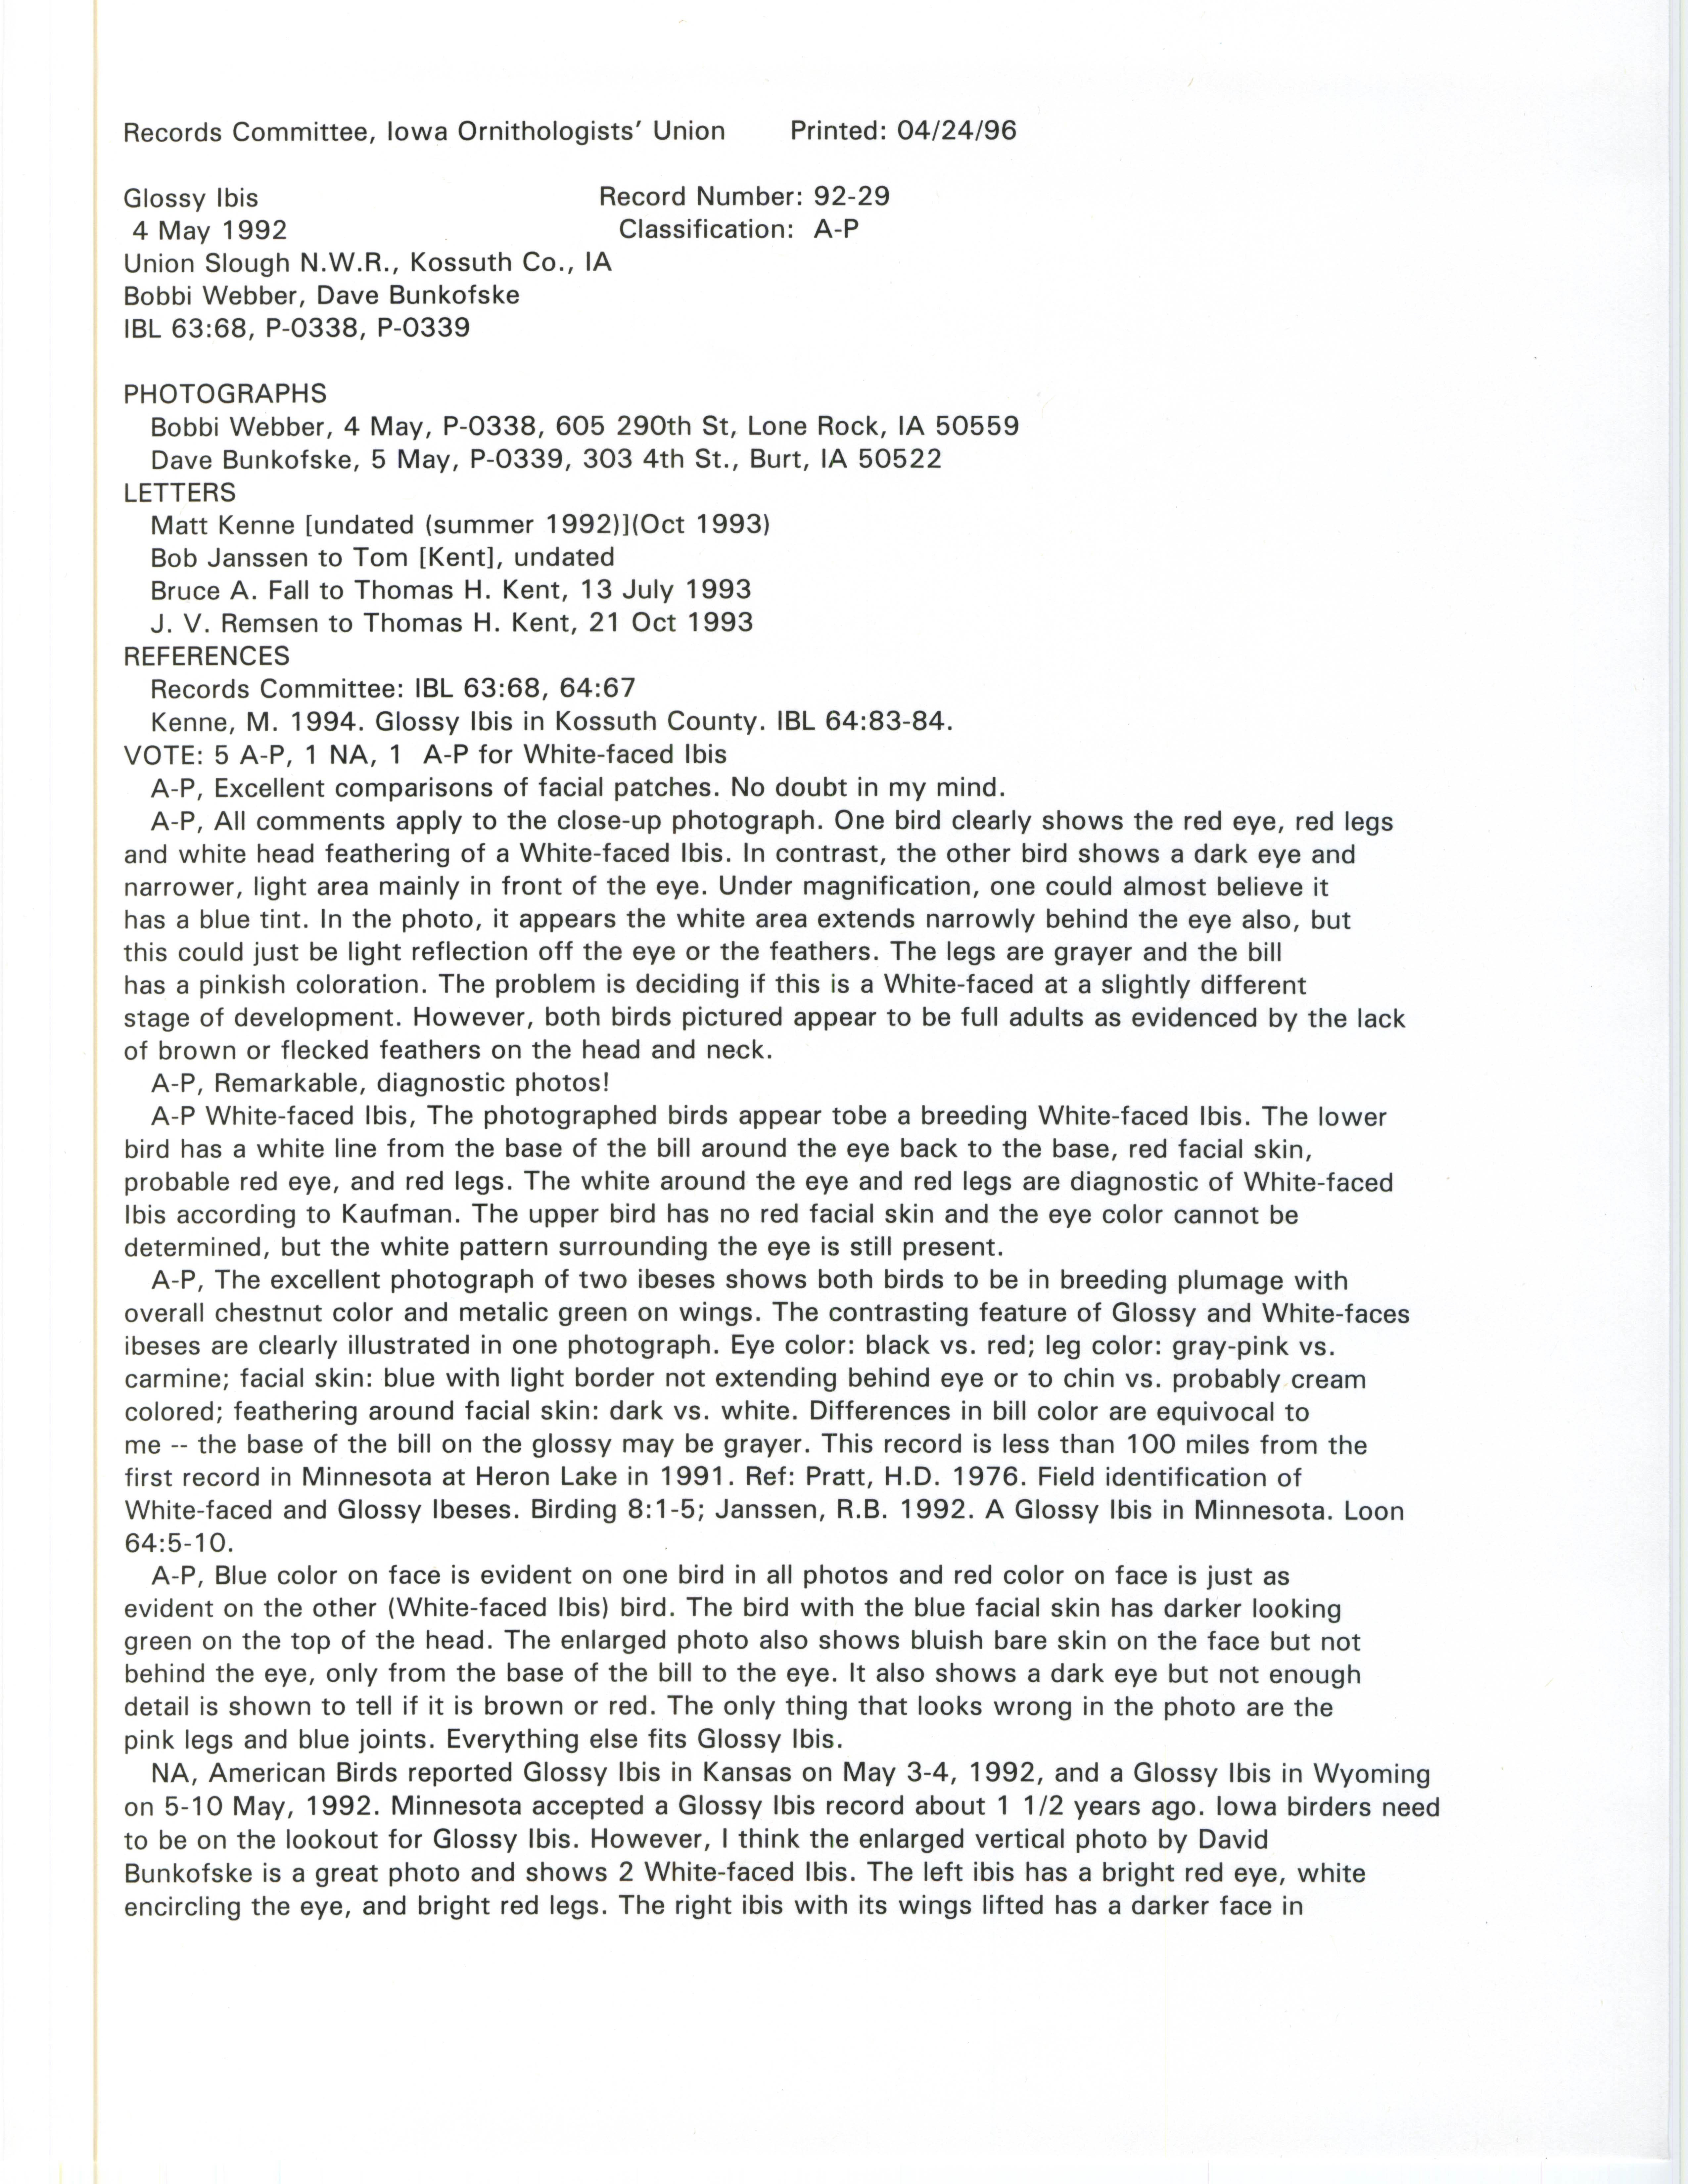 Records Committee review for rare bird sighting for Glossy Ibis at Union Slough National Wildlife Refuge in 1992